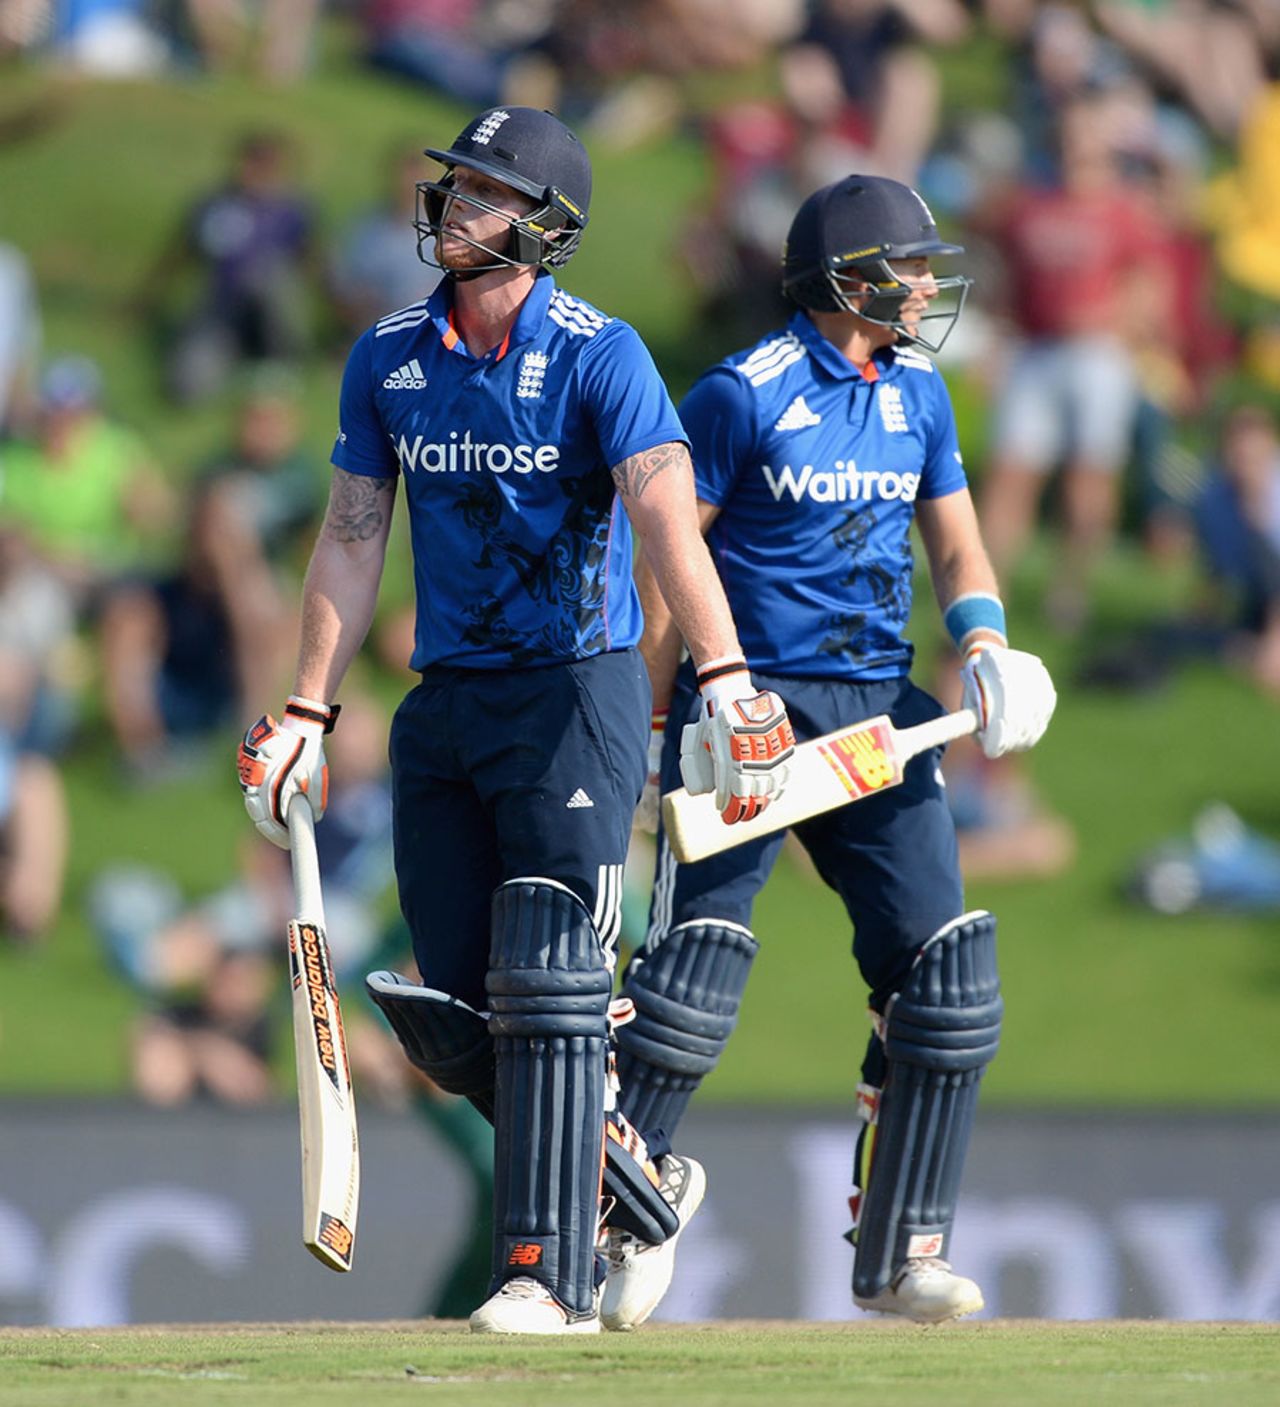 Joe Root was run out for 125 after a mix-up with Ben Stokes, South Africa v England, 3rd ODI, Centurion, February 9, 2016